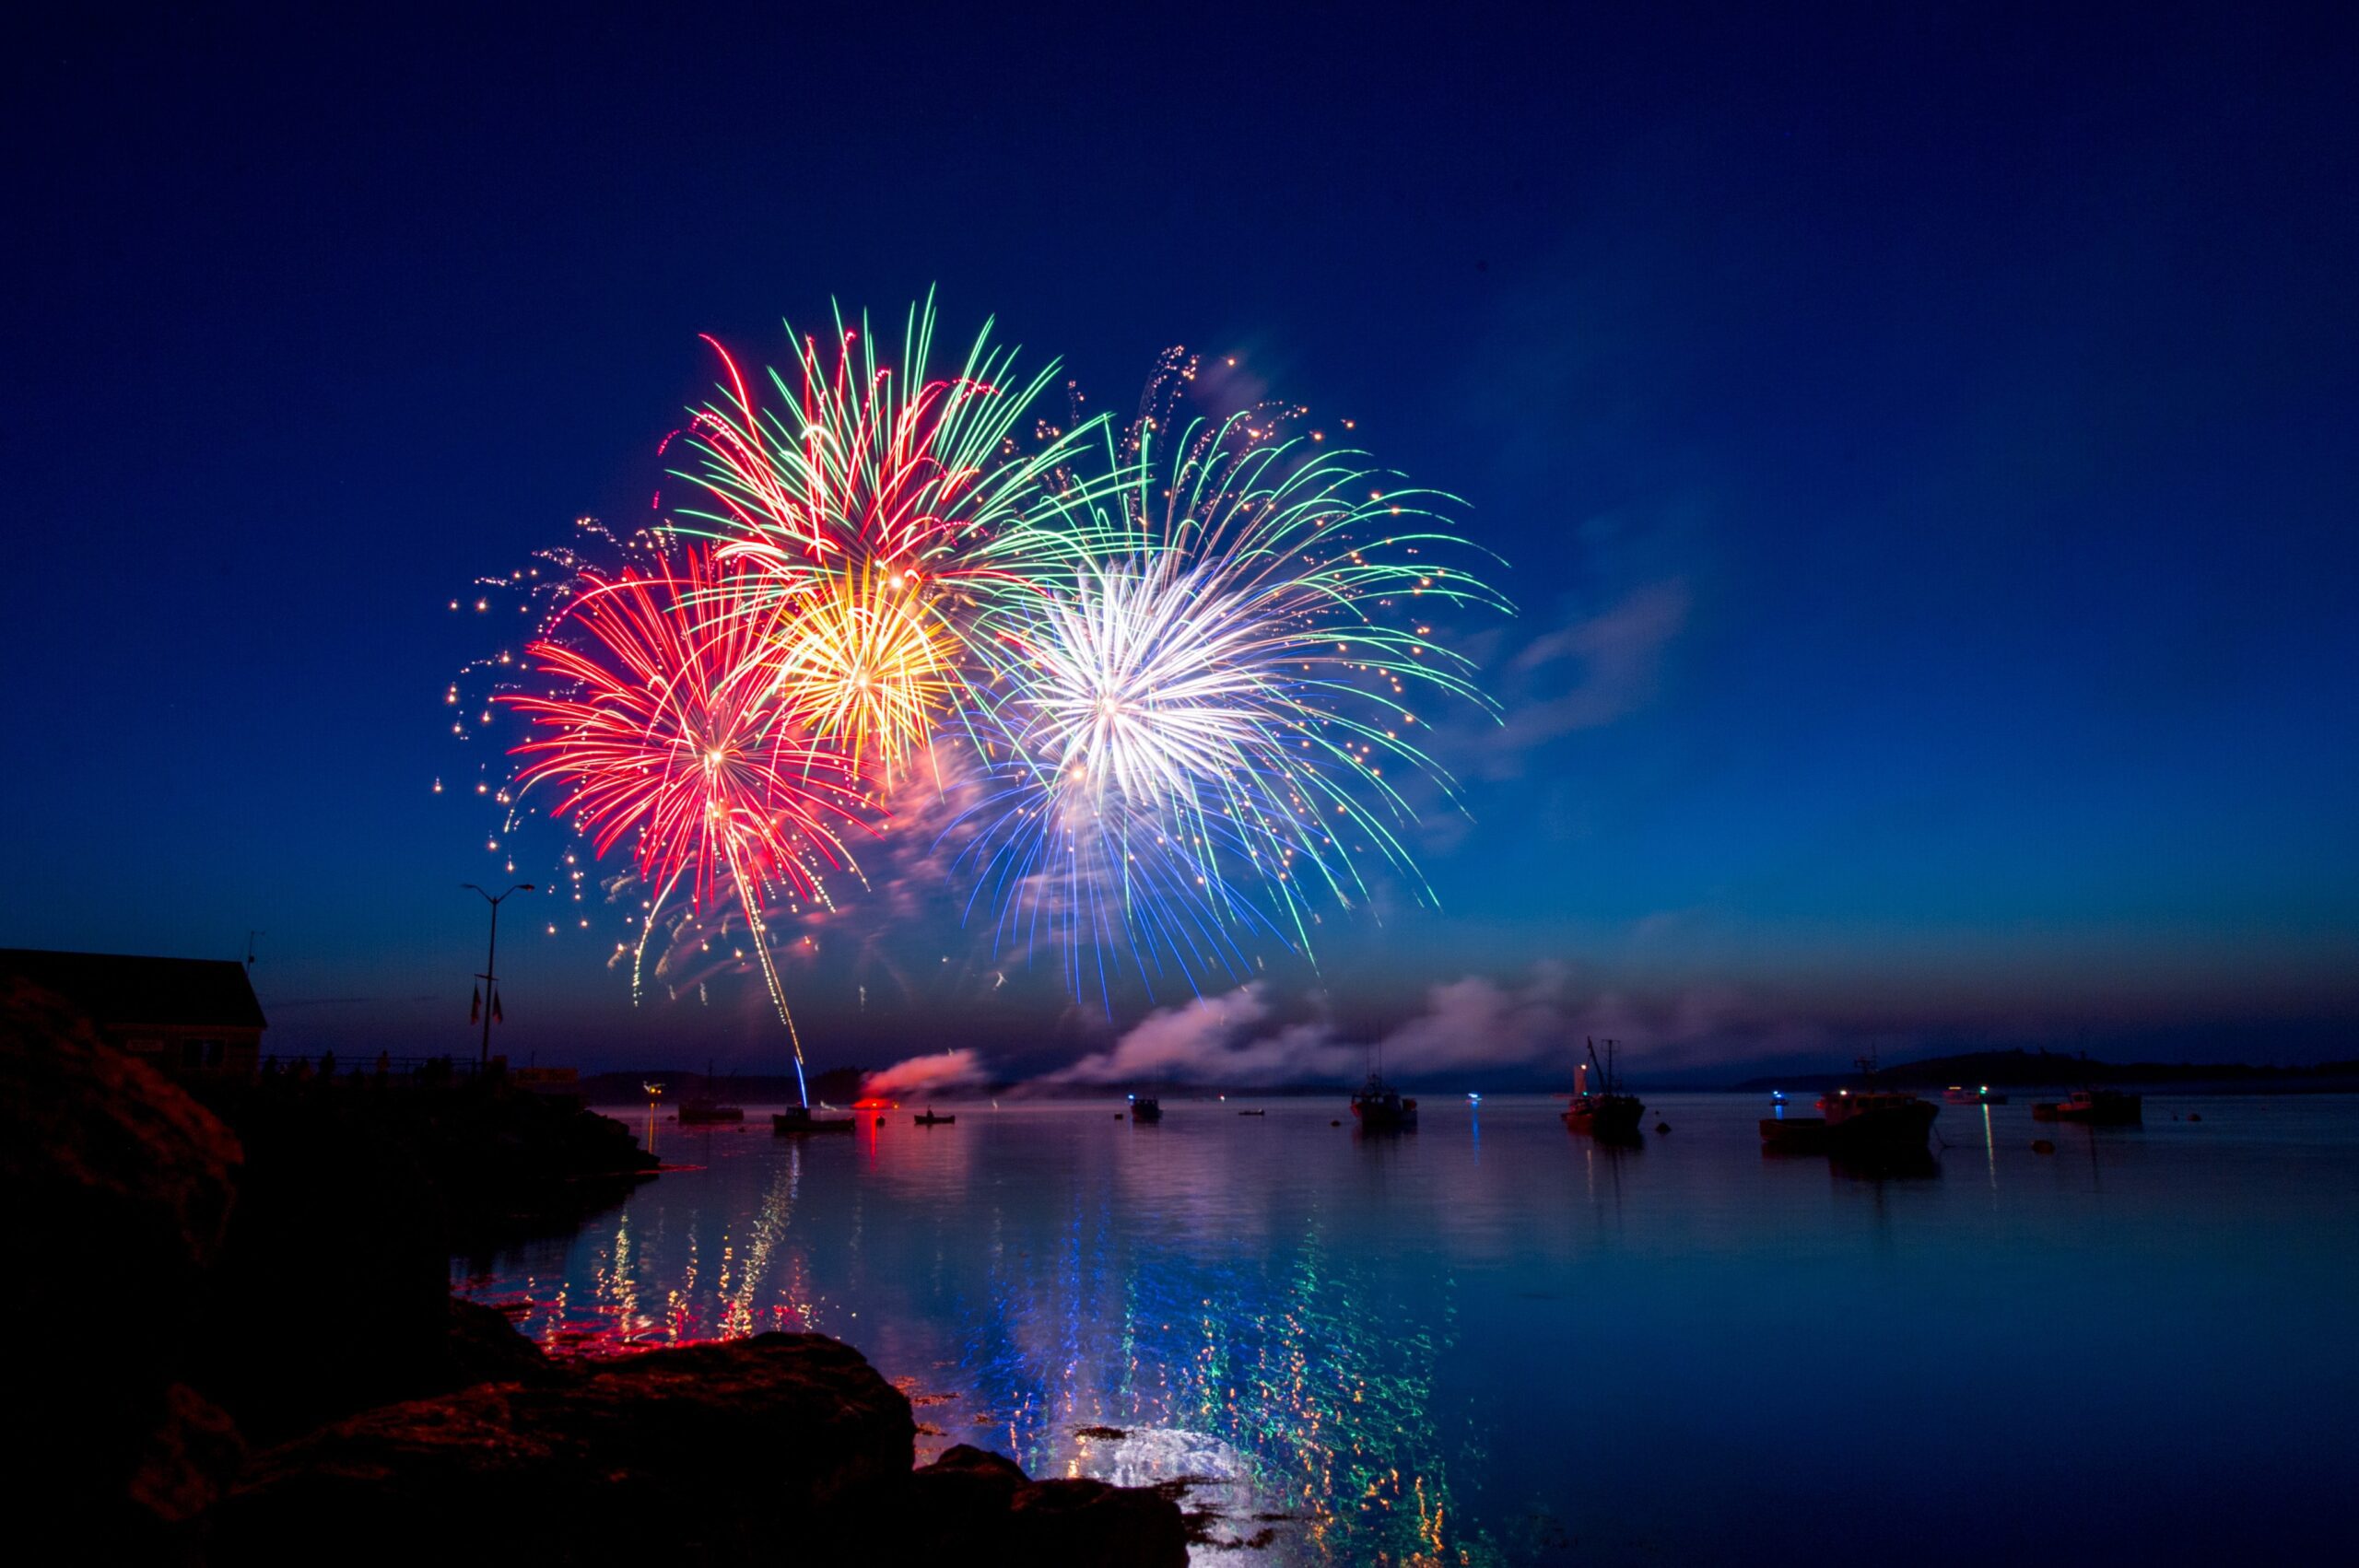 Fireworks explode in rainbow colors in a dusk-filled sky. The fireworks have been set off, and reflect off of, a body of water.